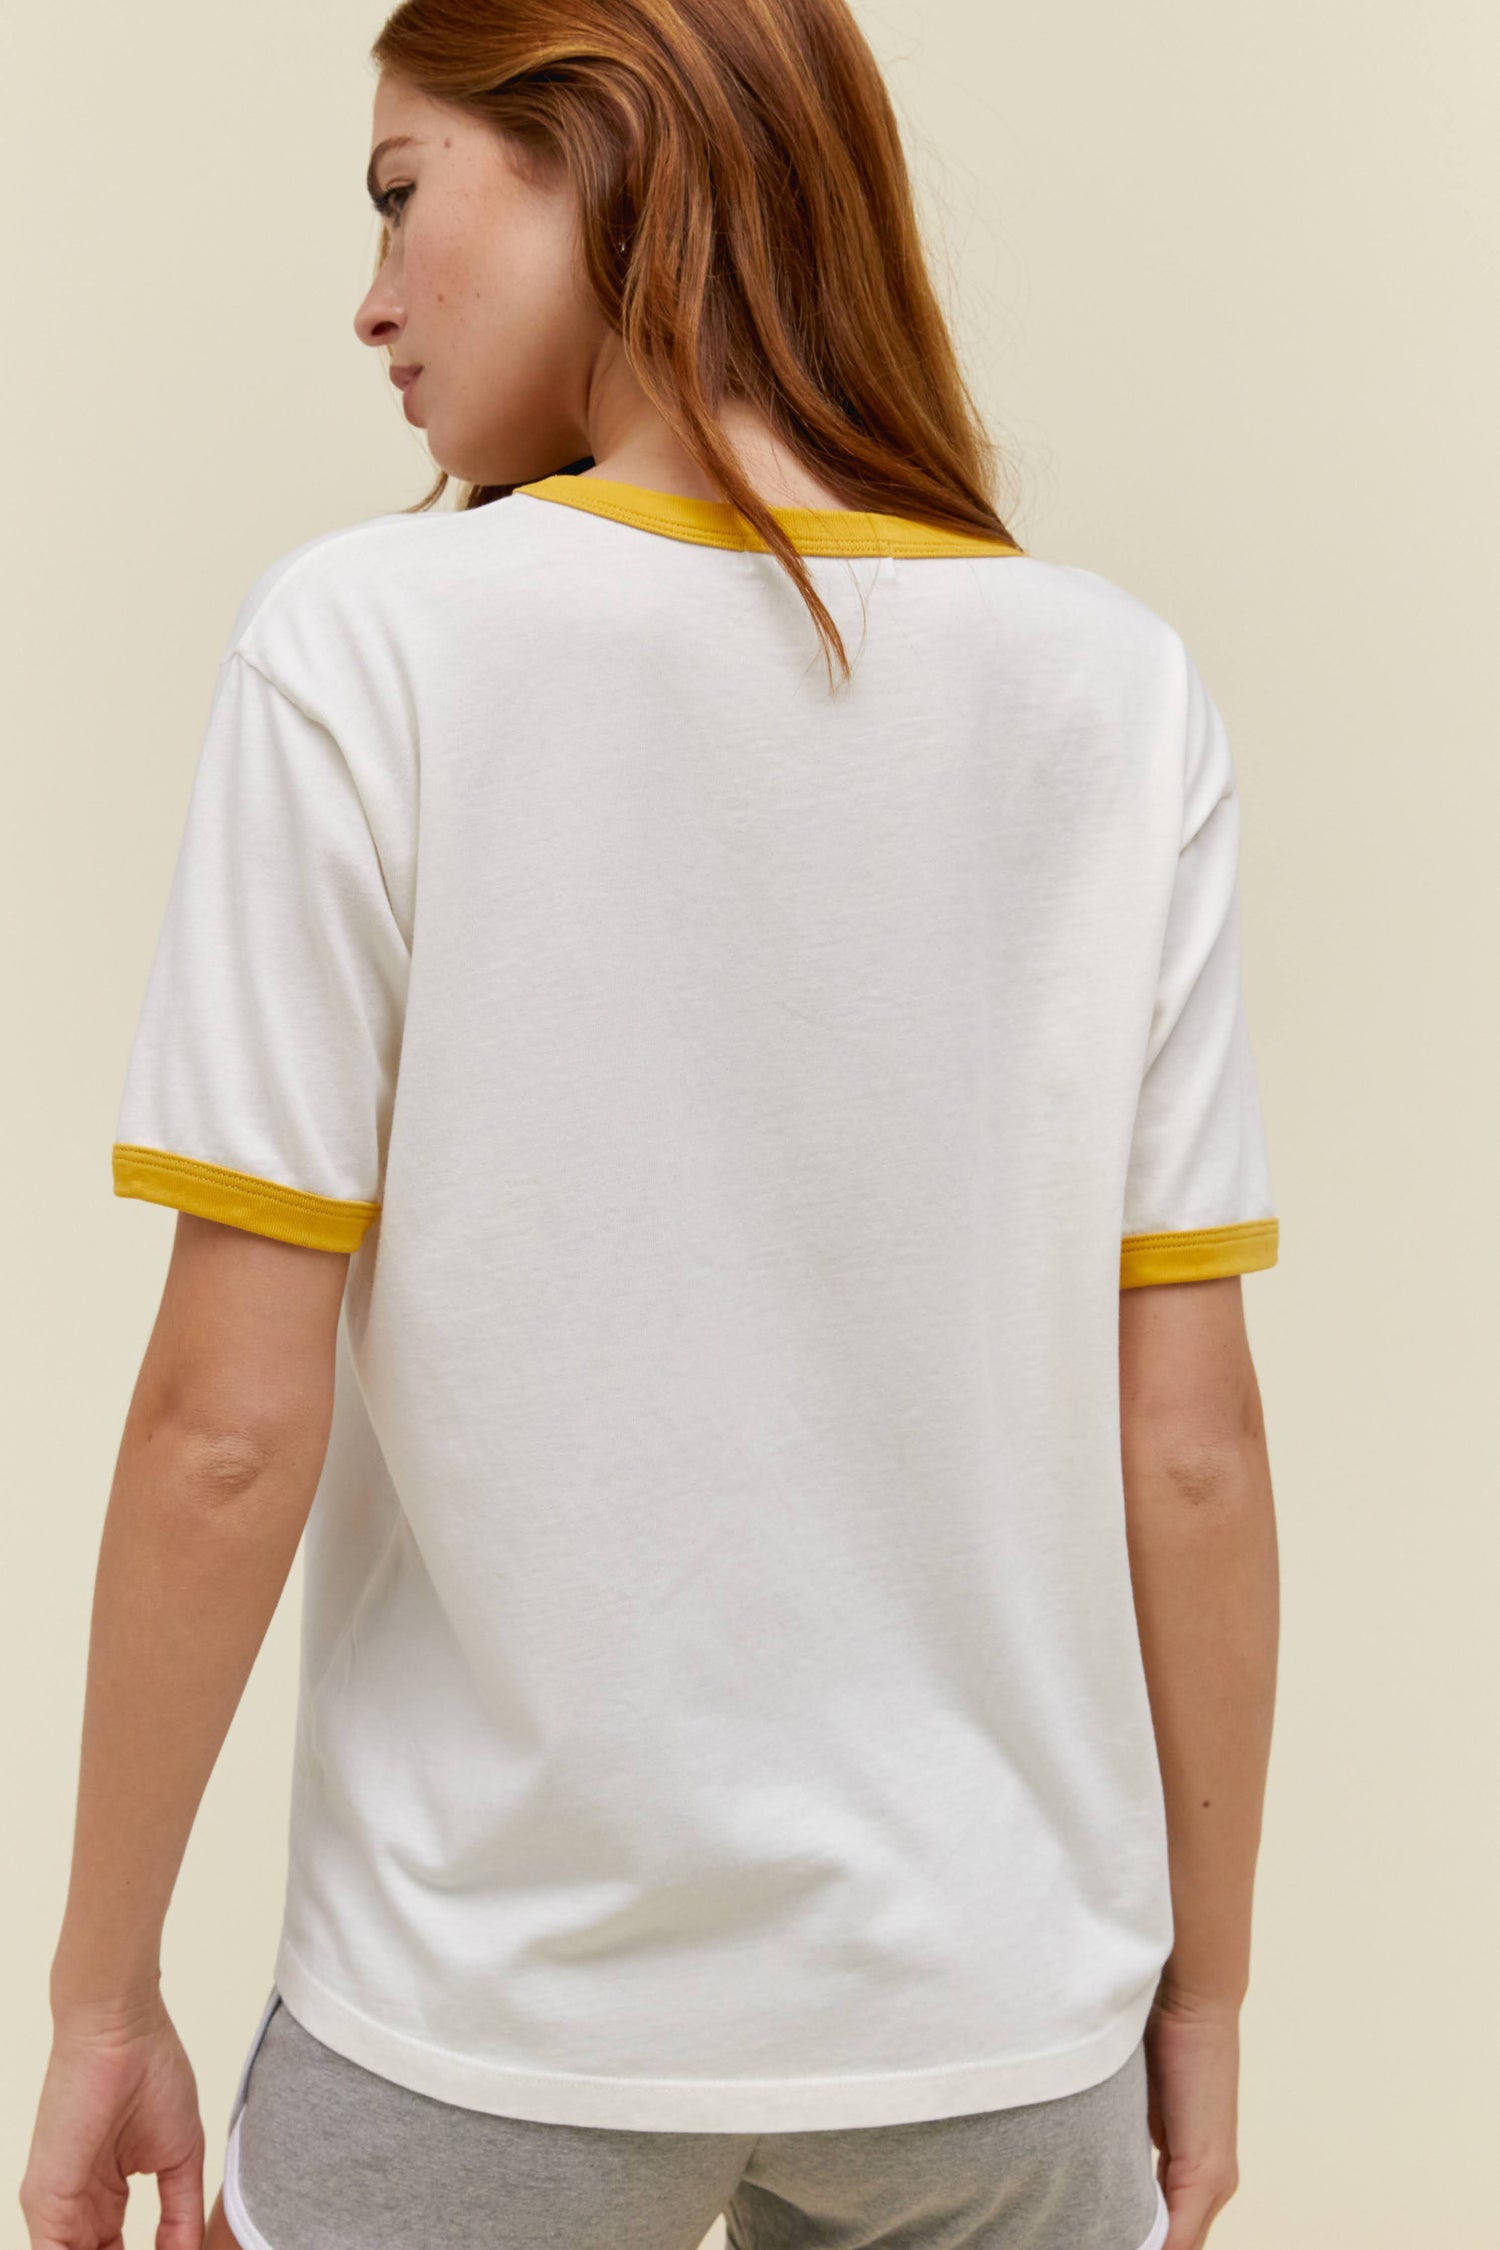 A model featuring a ringer tee with mustard-trimmed sleeves and neckline and adorned with "Beastie Boys" across the chest area